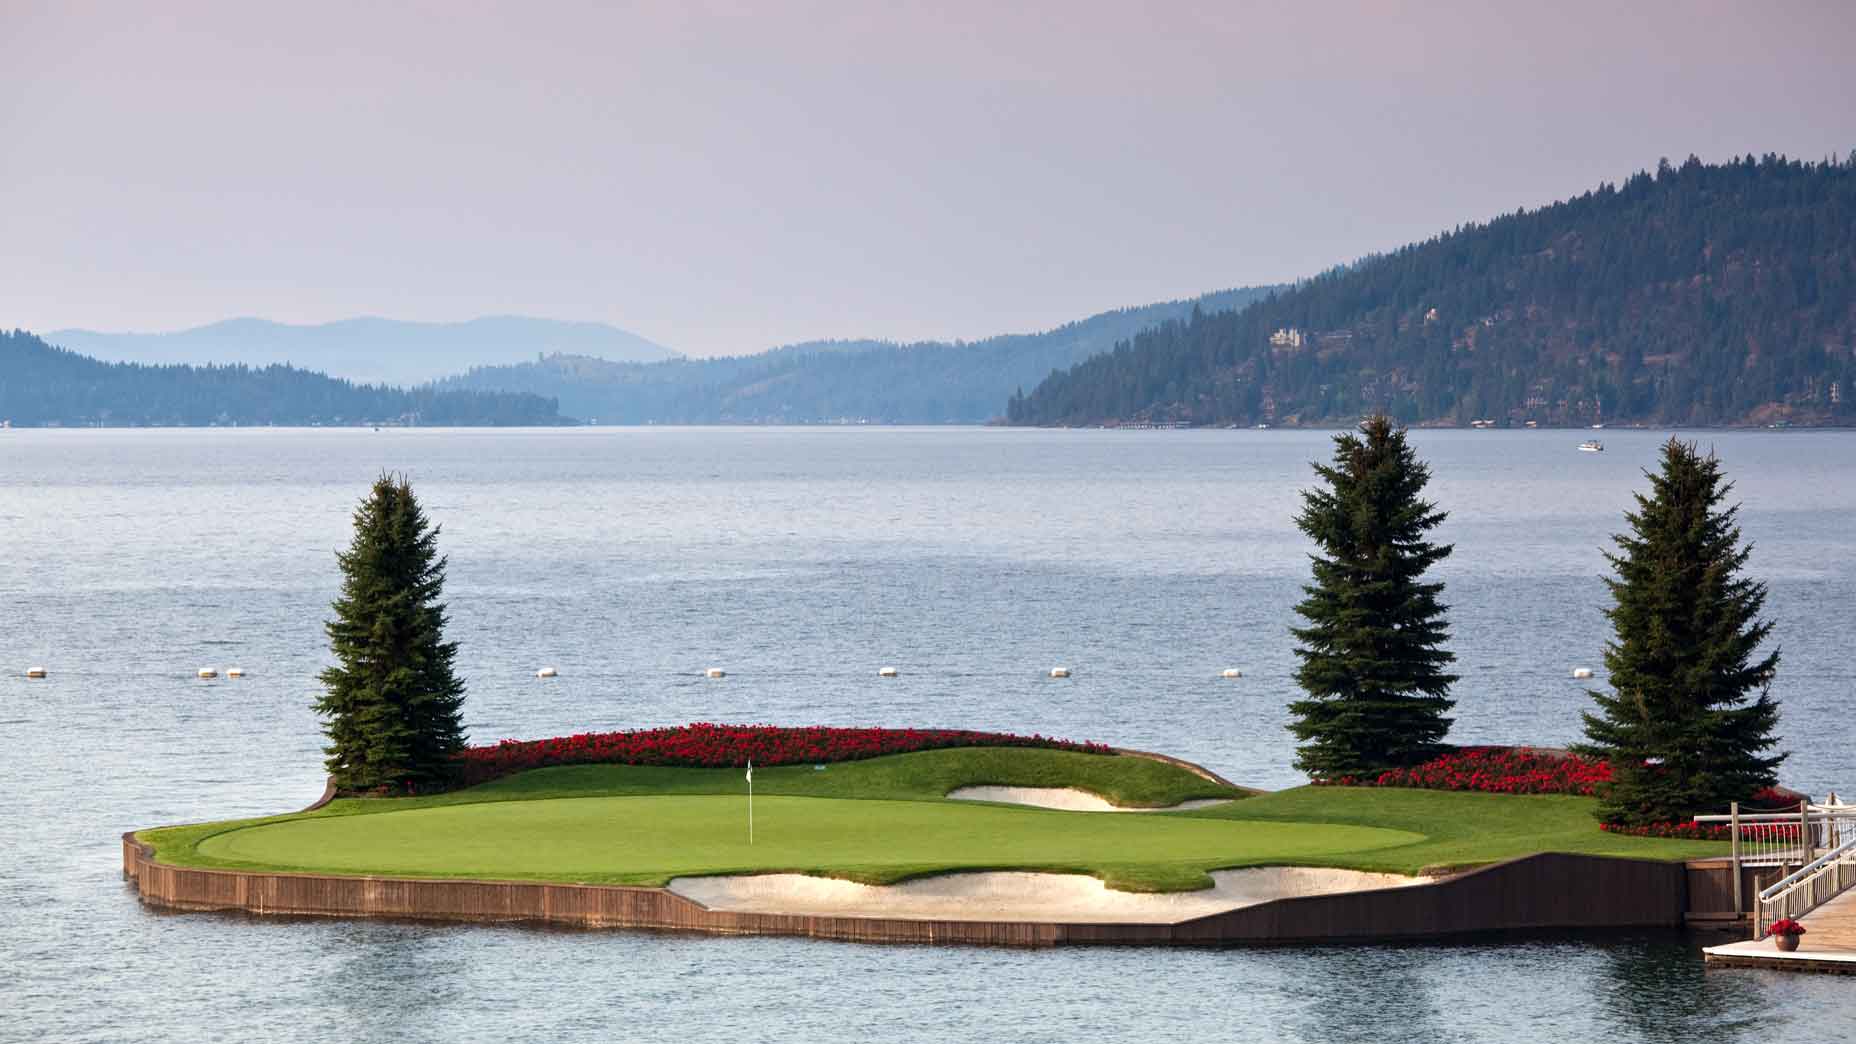 The island green at Couer d'Alene golf course